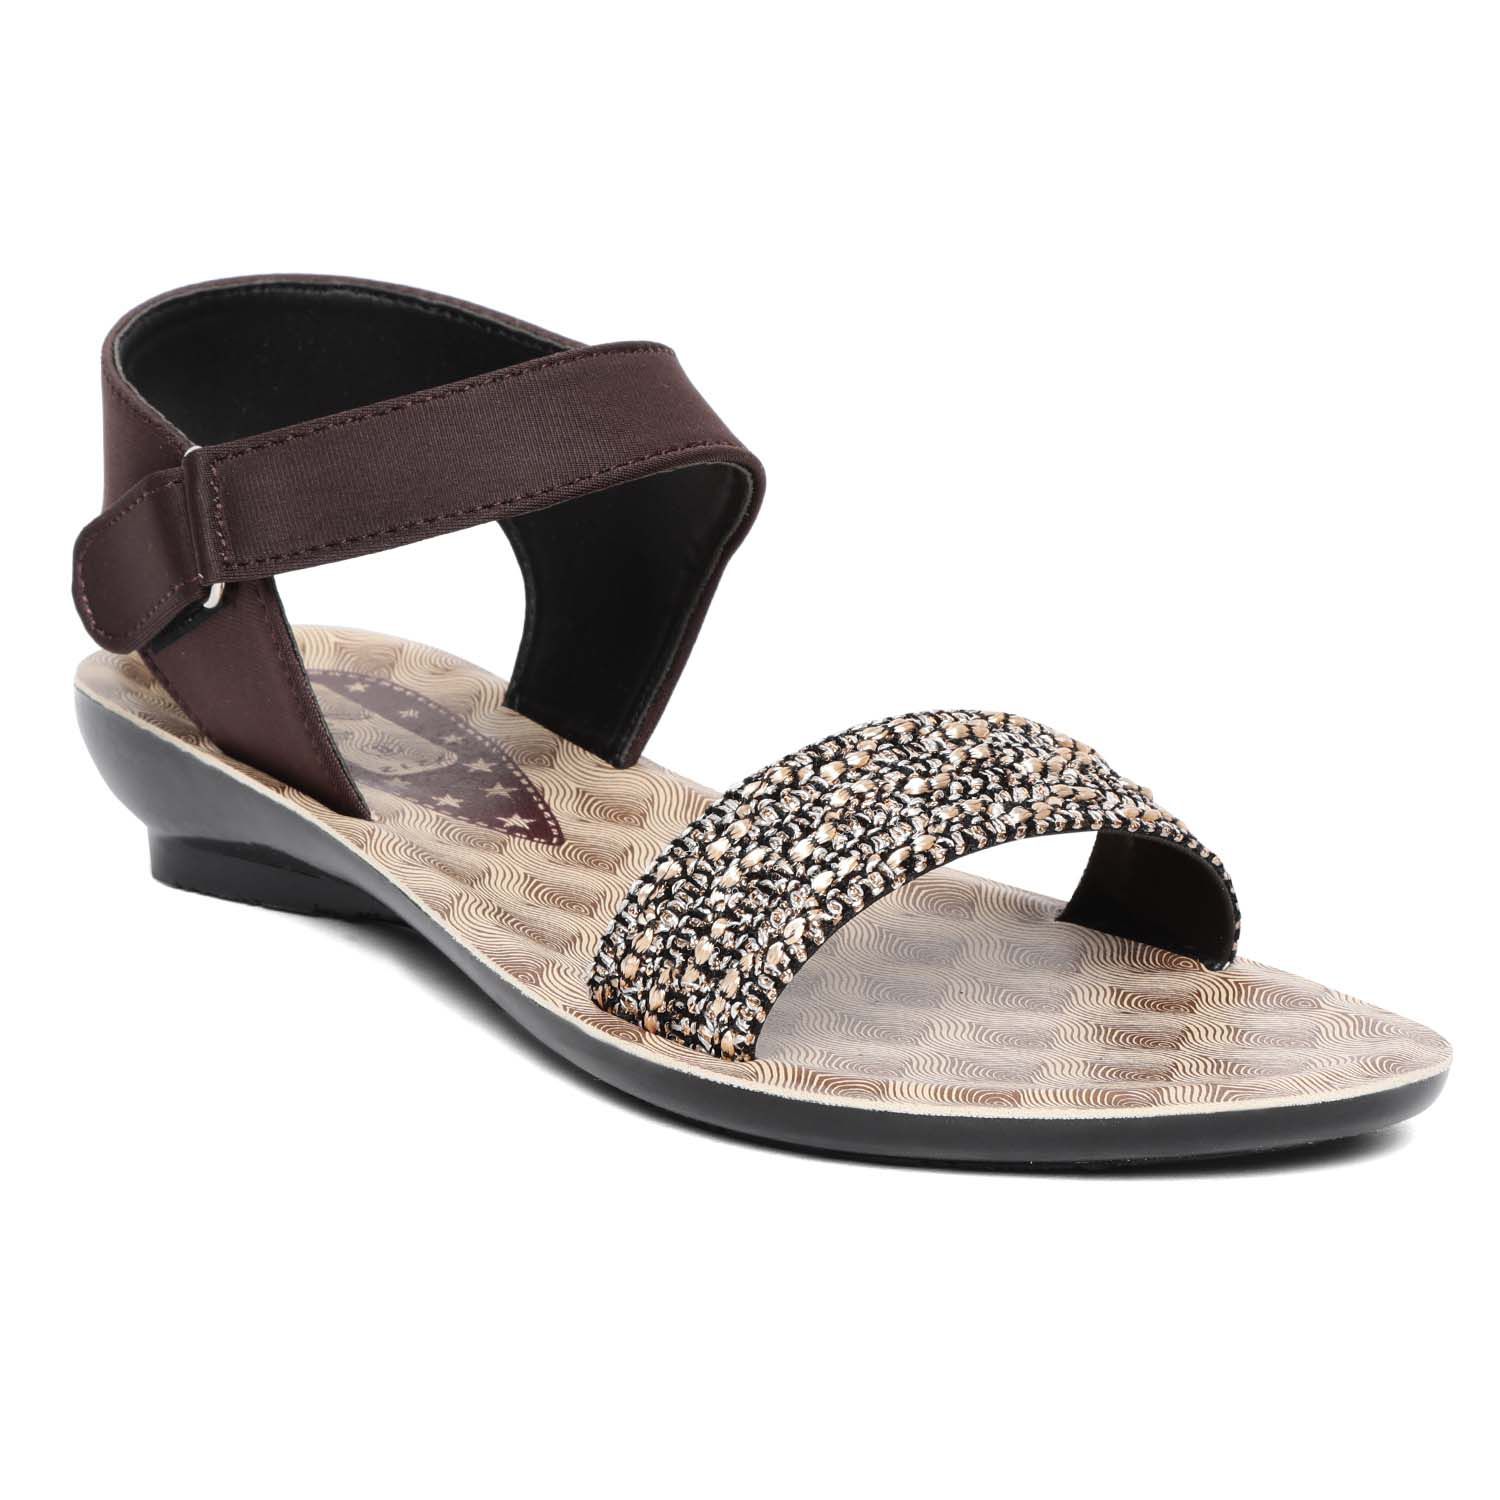 paragon footwear for womens online